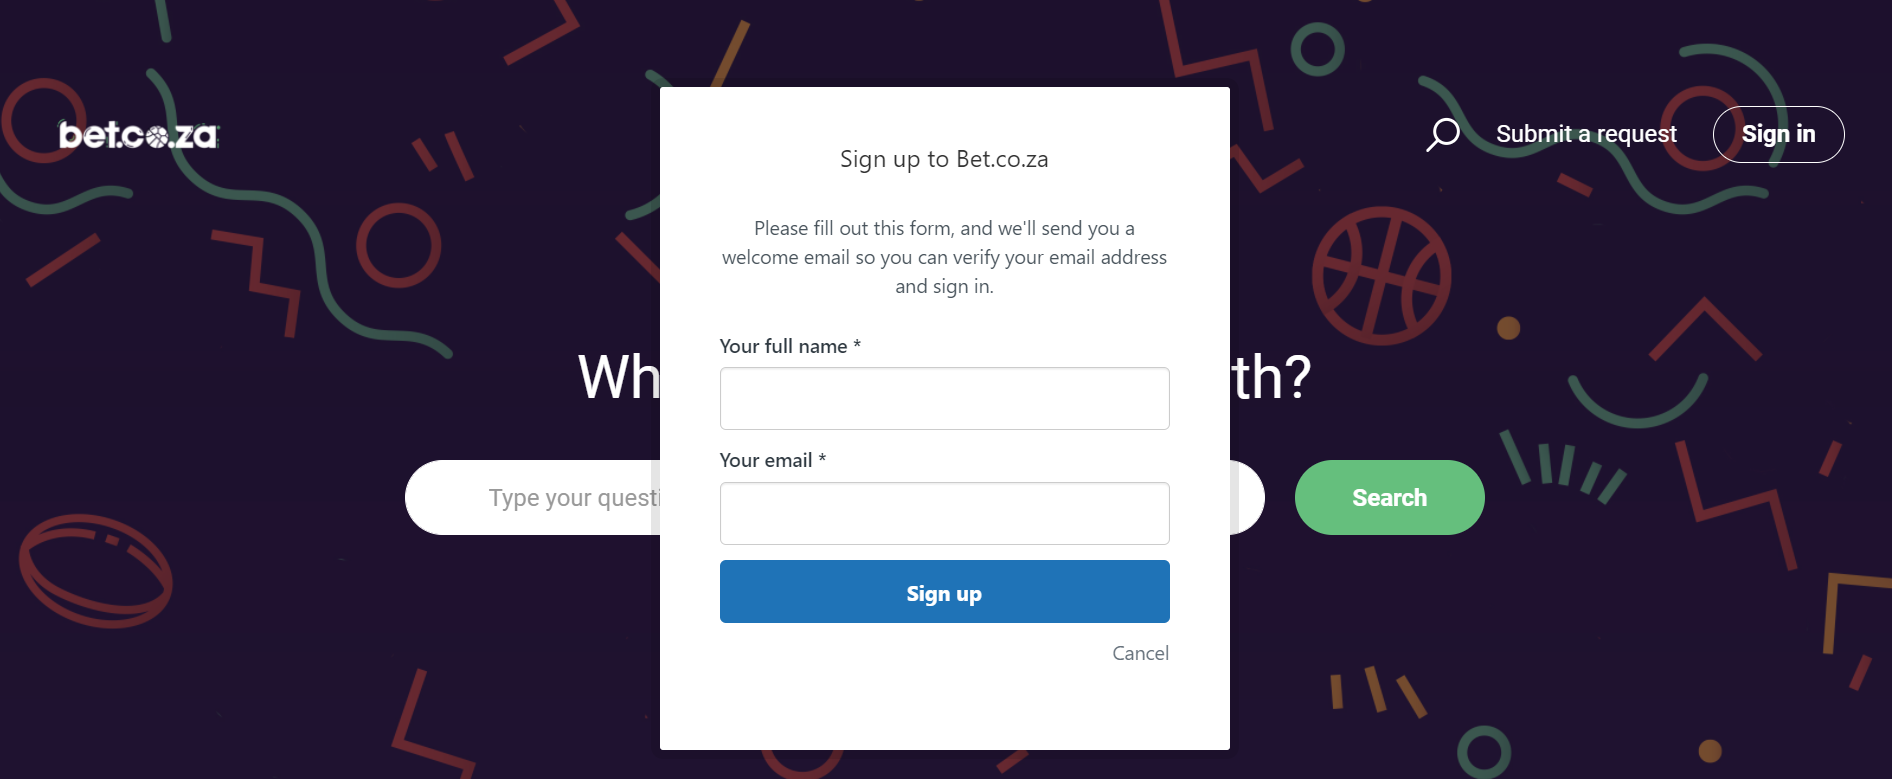 Sign up with Bet.co.za in a simple 1 step process and complete registration in a few minutes.